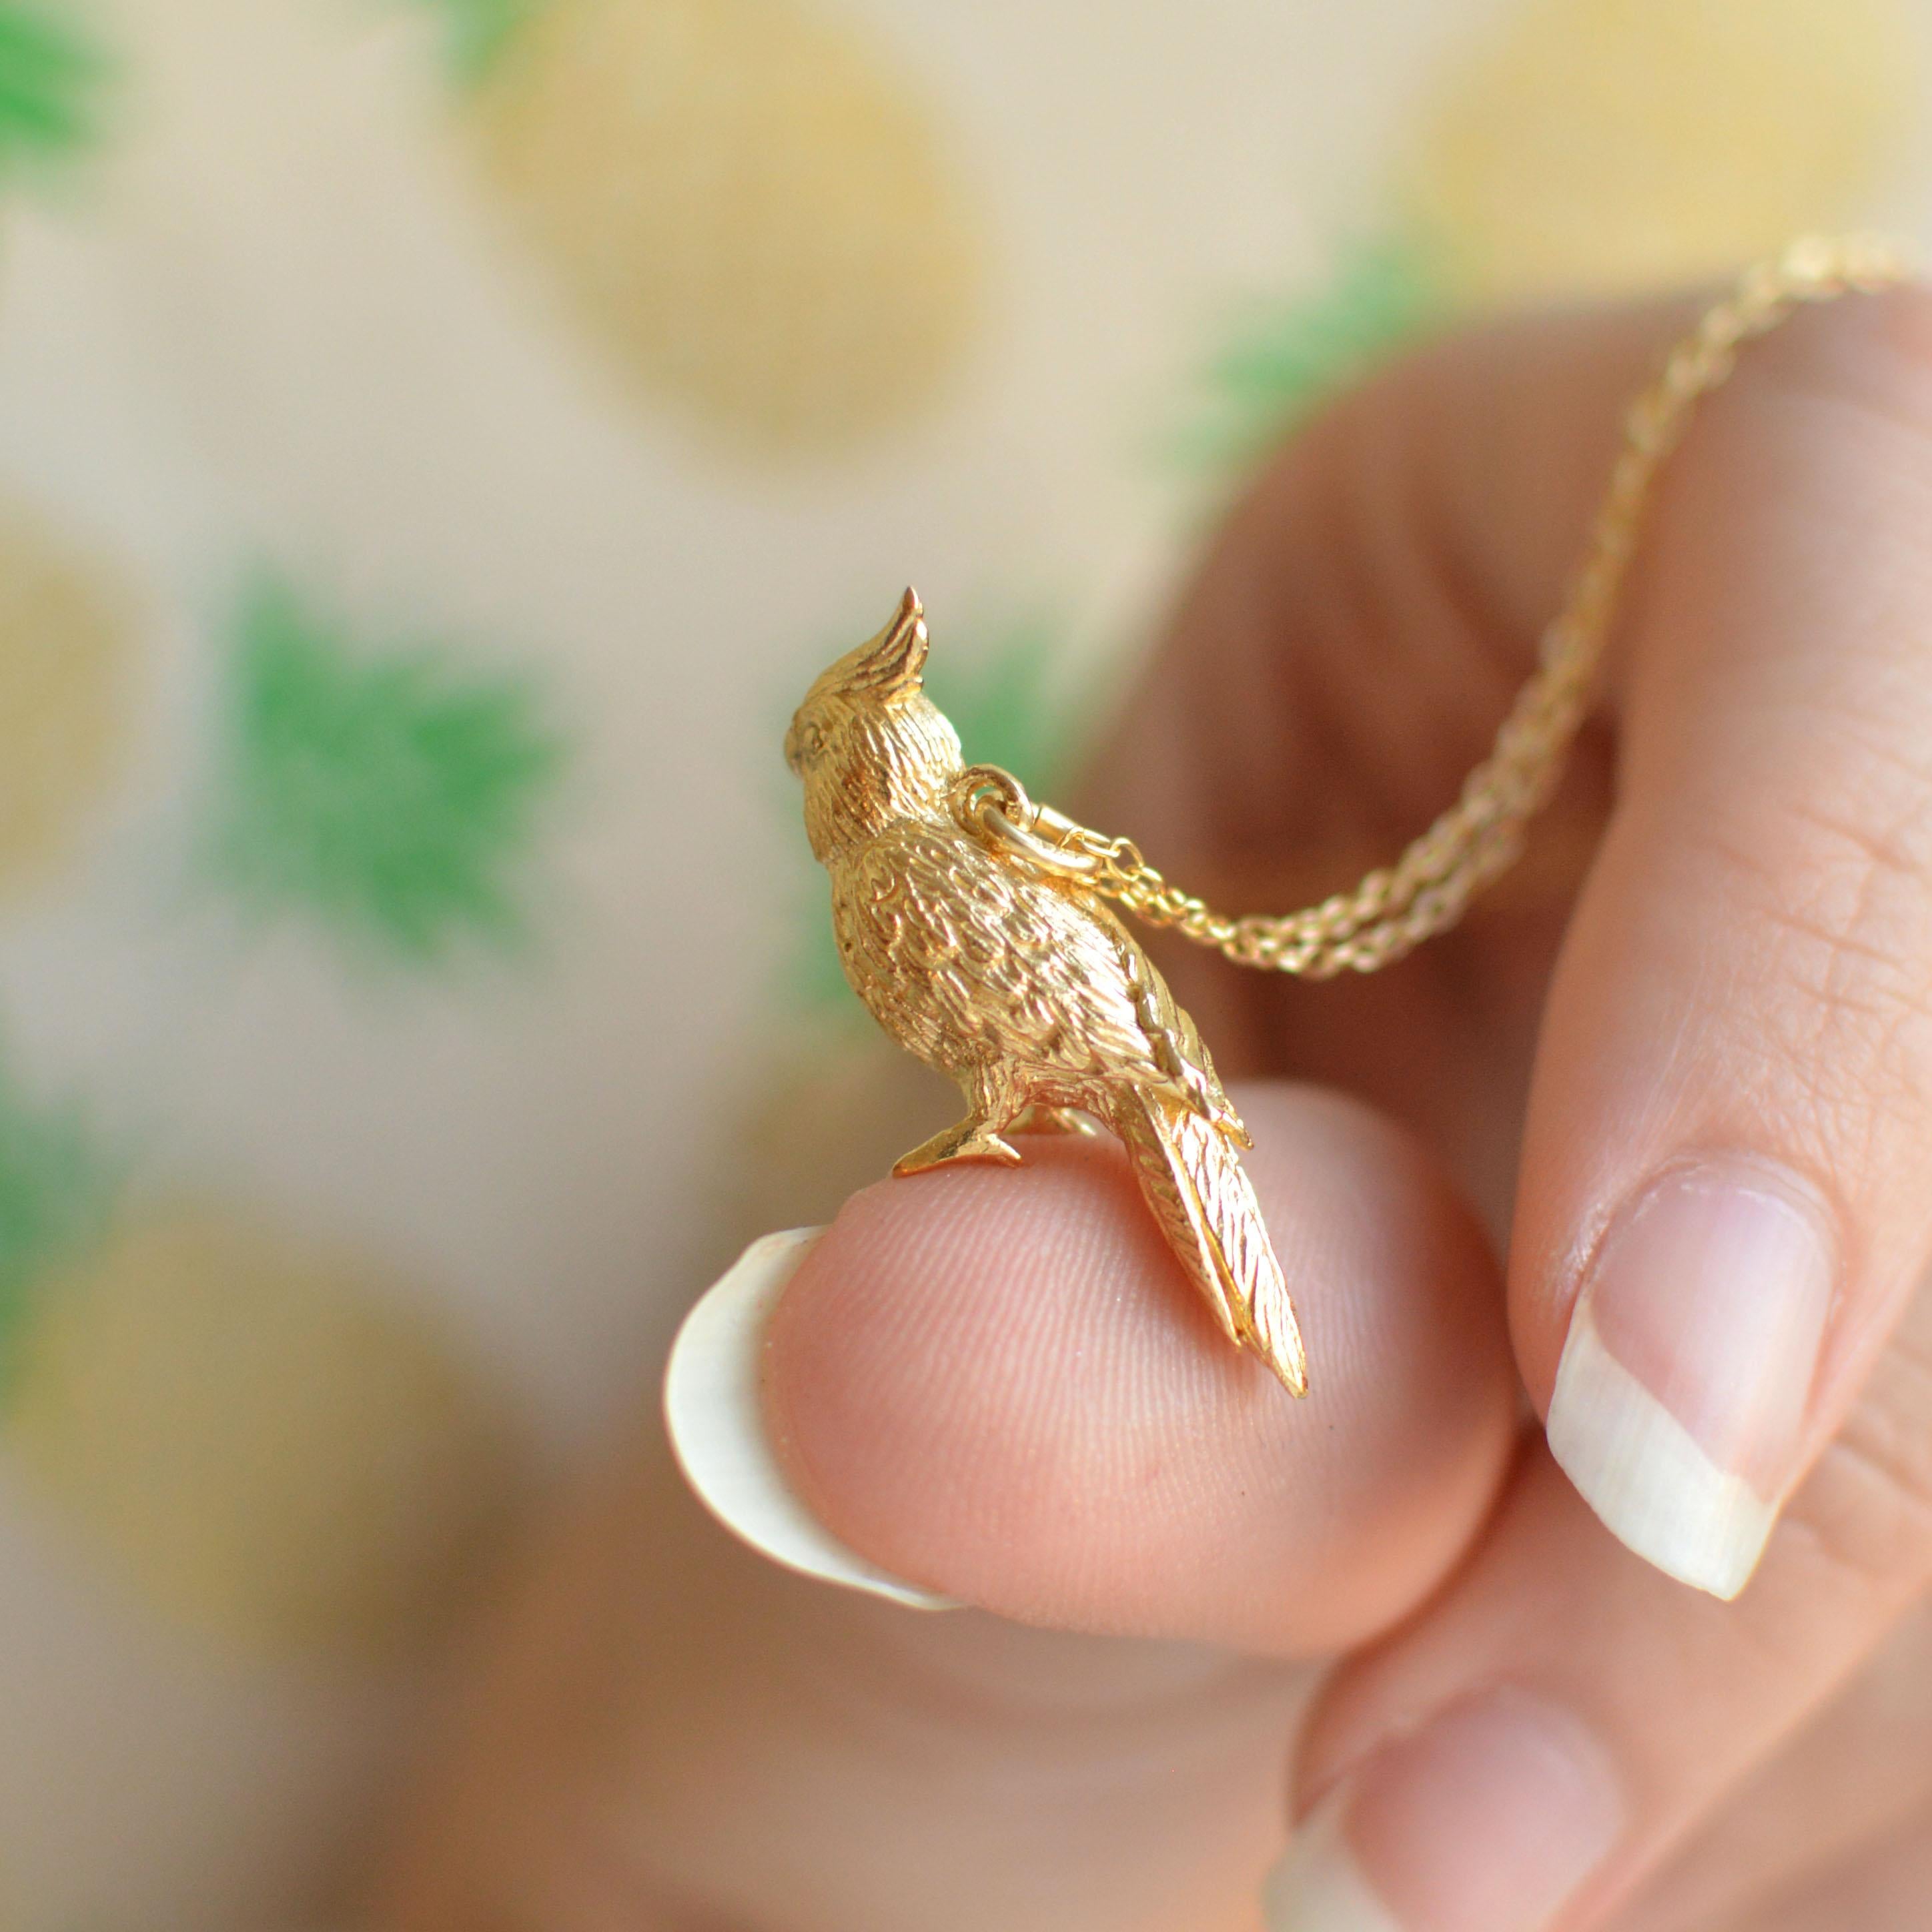 This slender little cockatiel pendant is cast in solid 18 Carat gold and finished by hand, and is created from Lucy's original hand-sculpted design. 

This lovely cockatiel pendant is made in London, United Kingdom using recycled or fairtrade Gold.